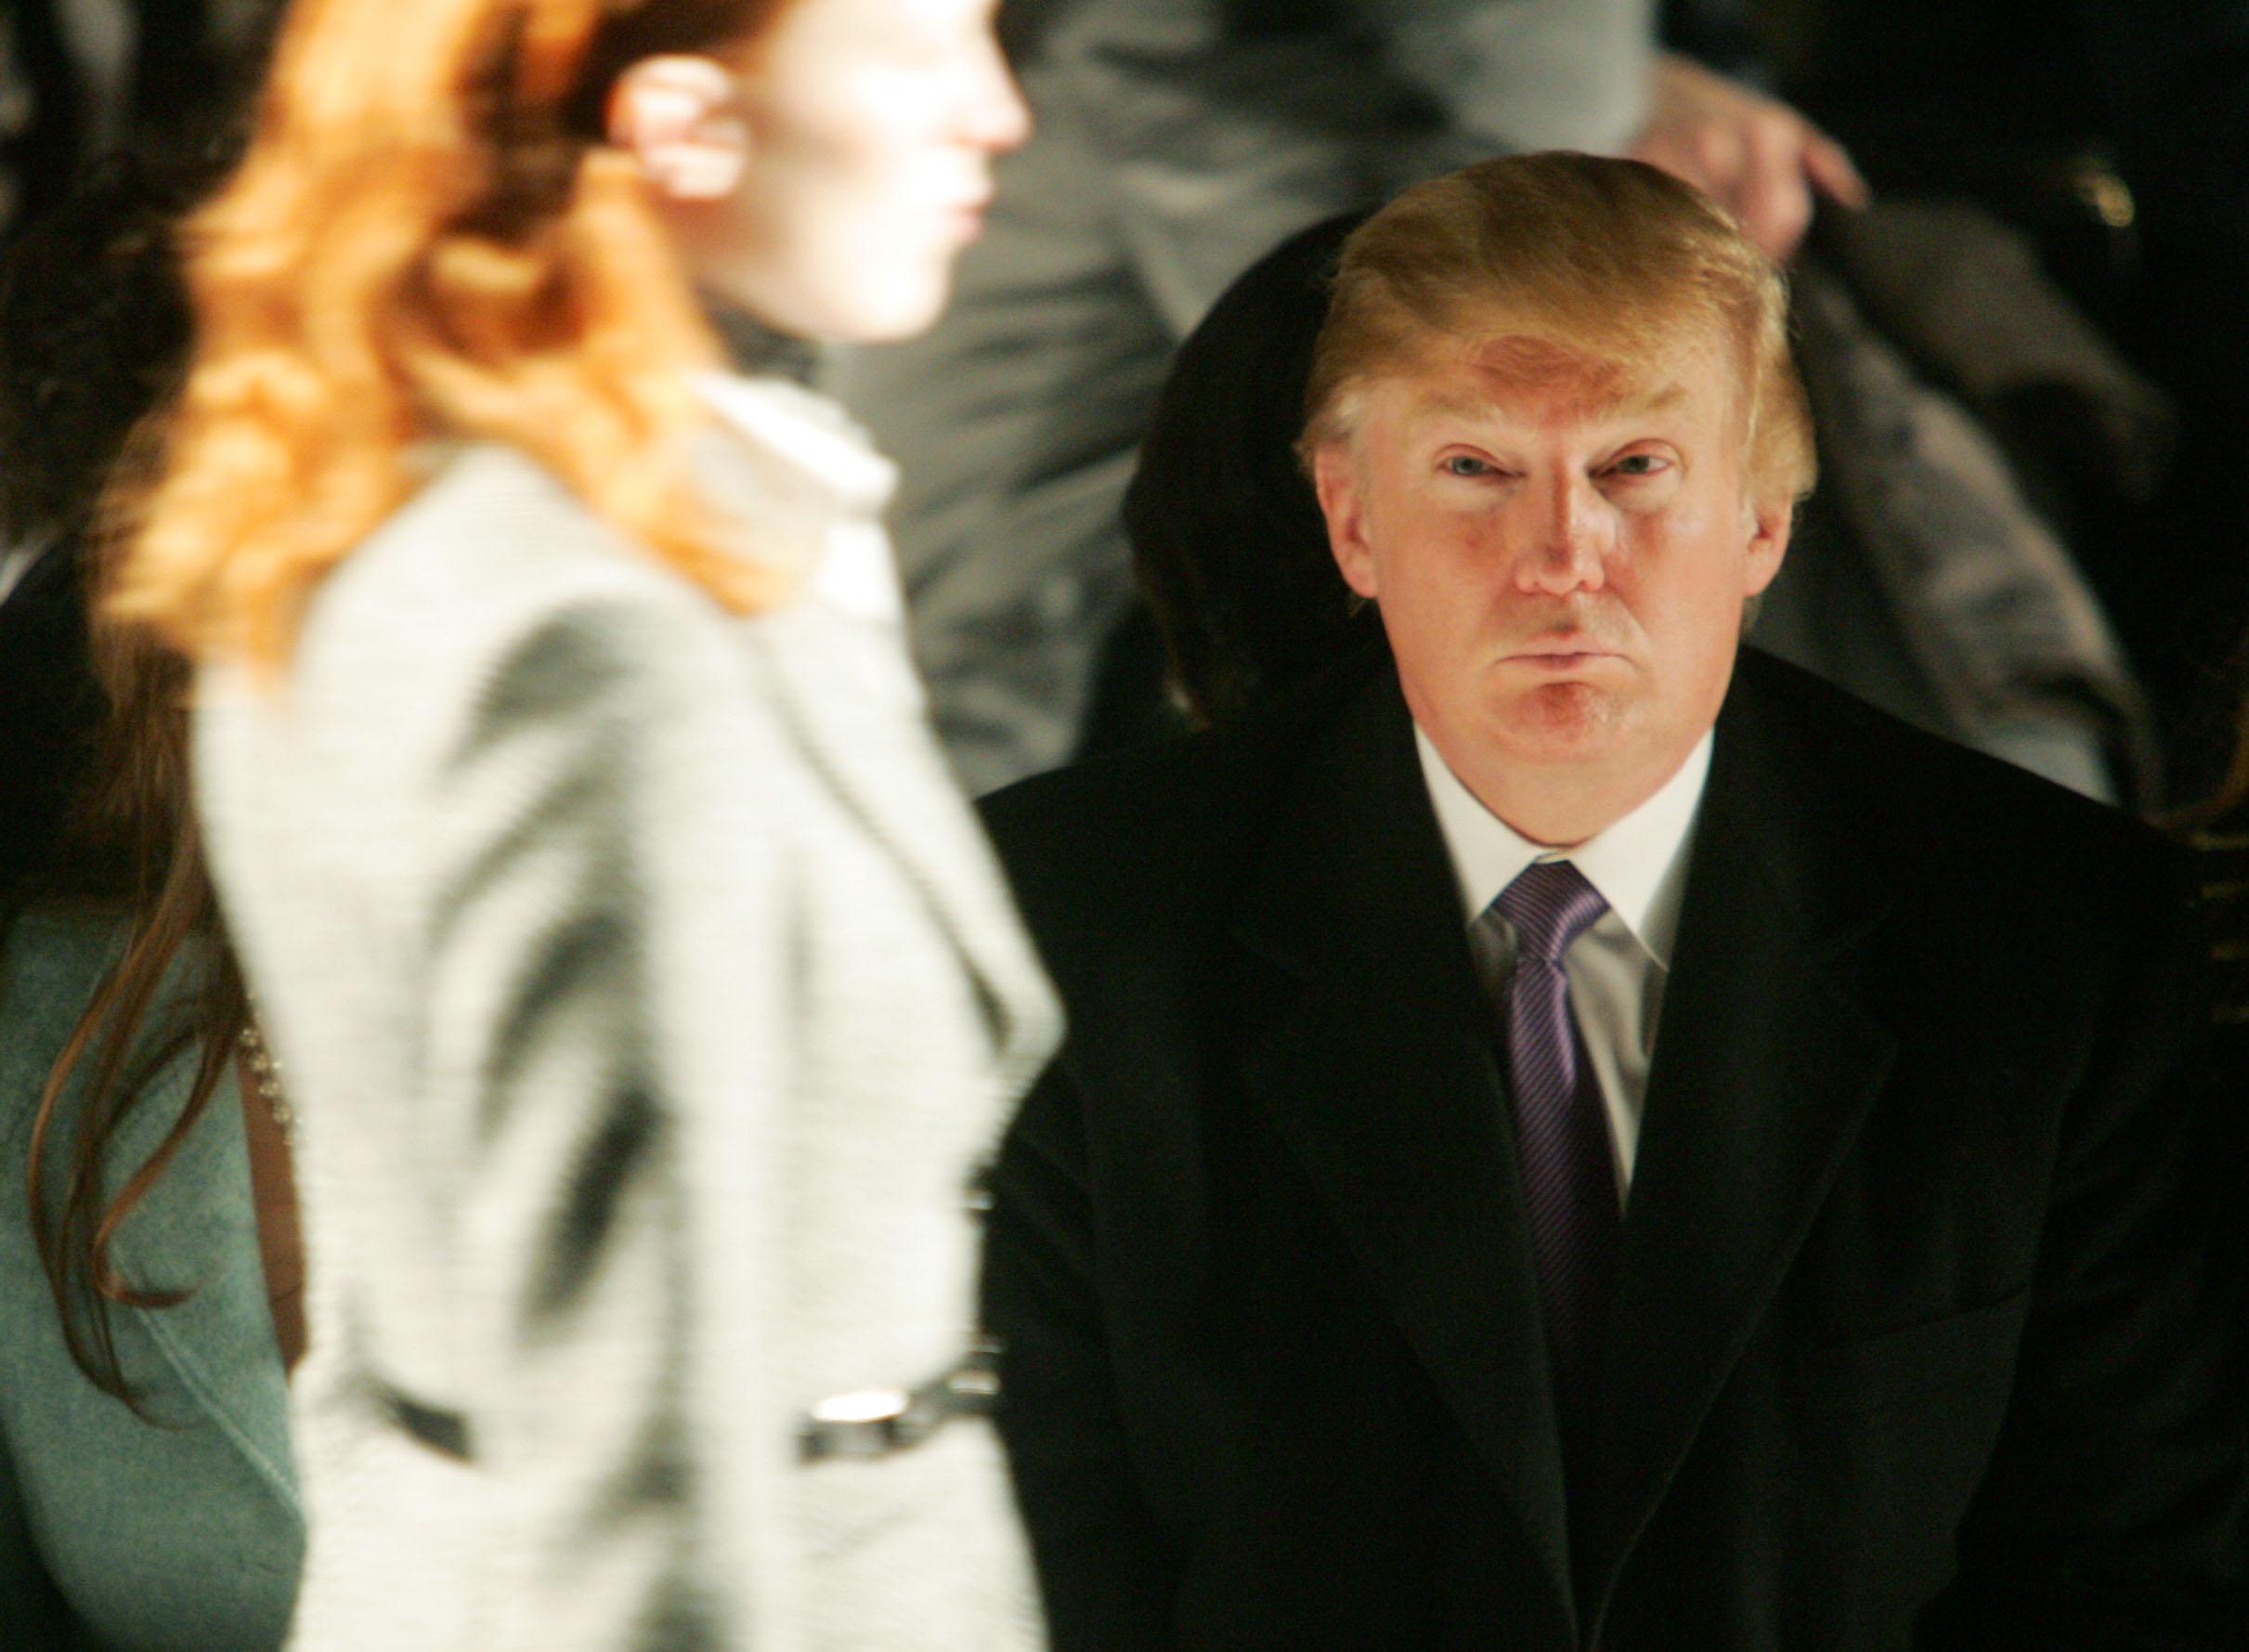 Donald Trump attends the Michael Kors Fall 2005 fashion show